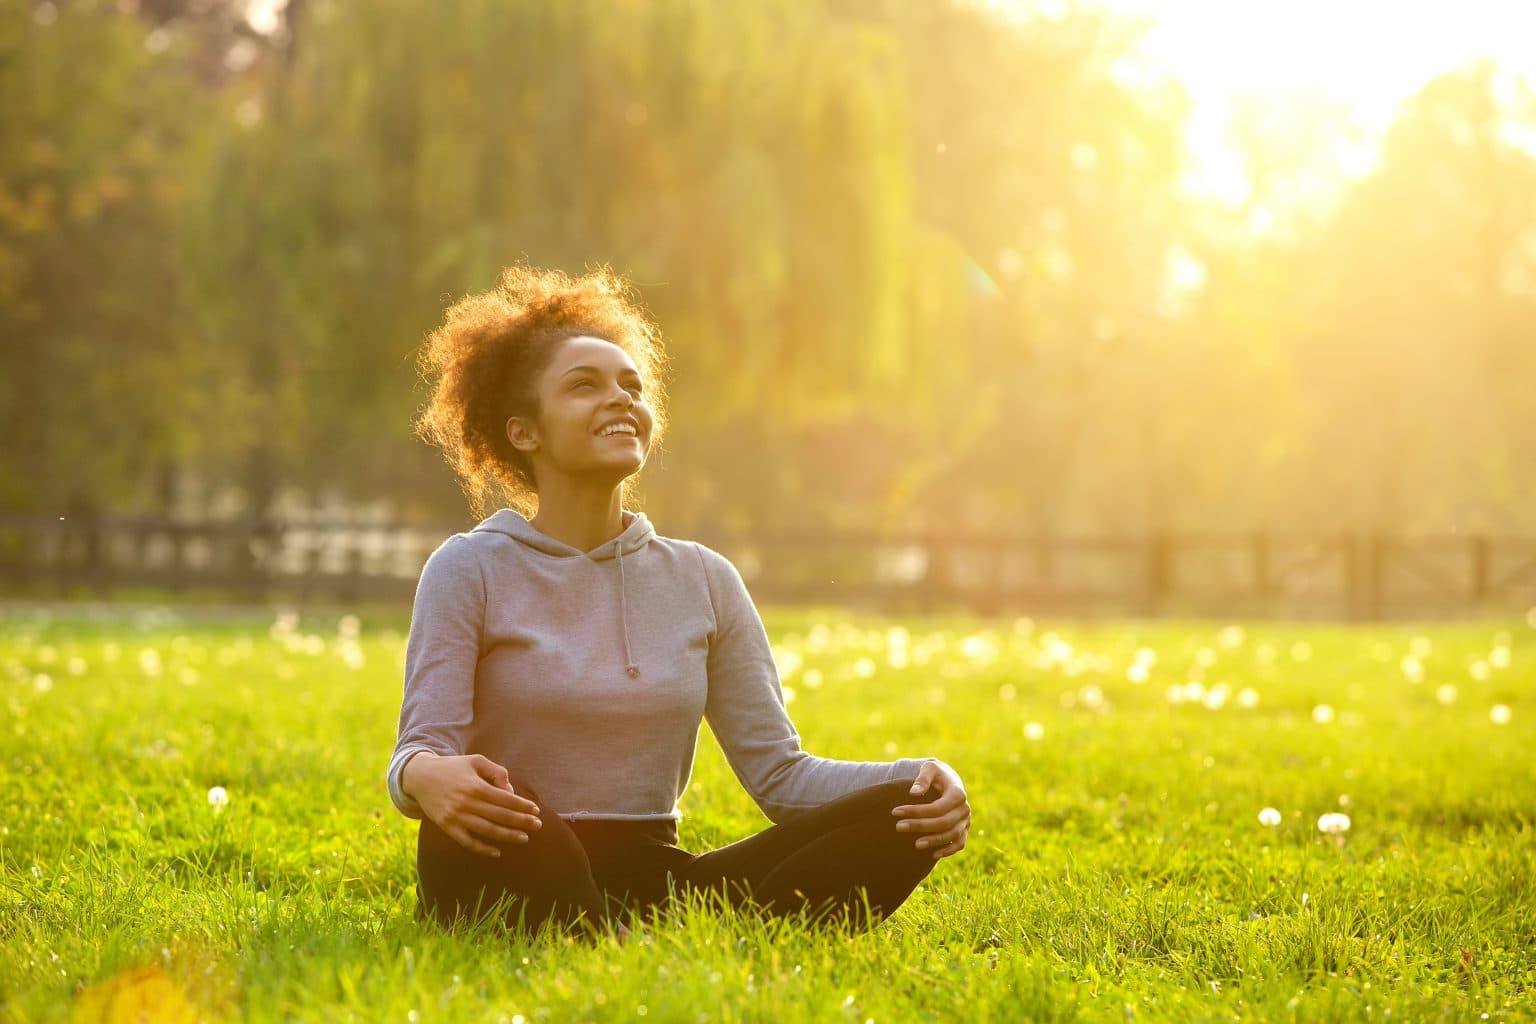 Young woman sitting outdoors in yoga position while breathing clearly after nasal polyp procedure.